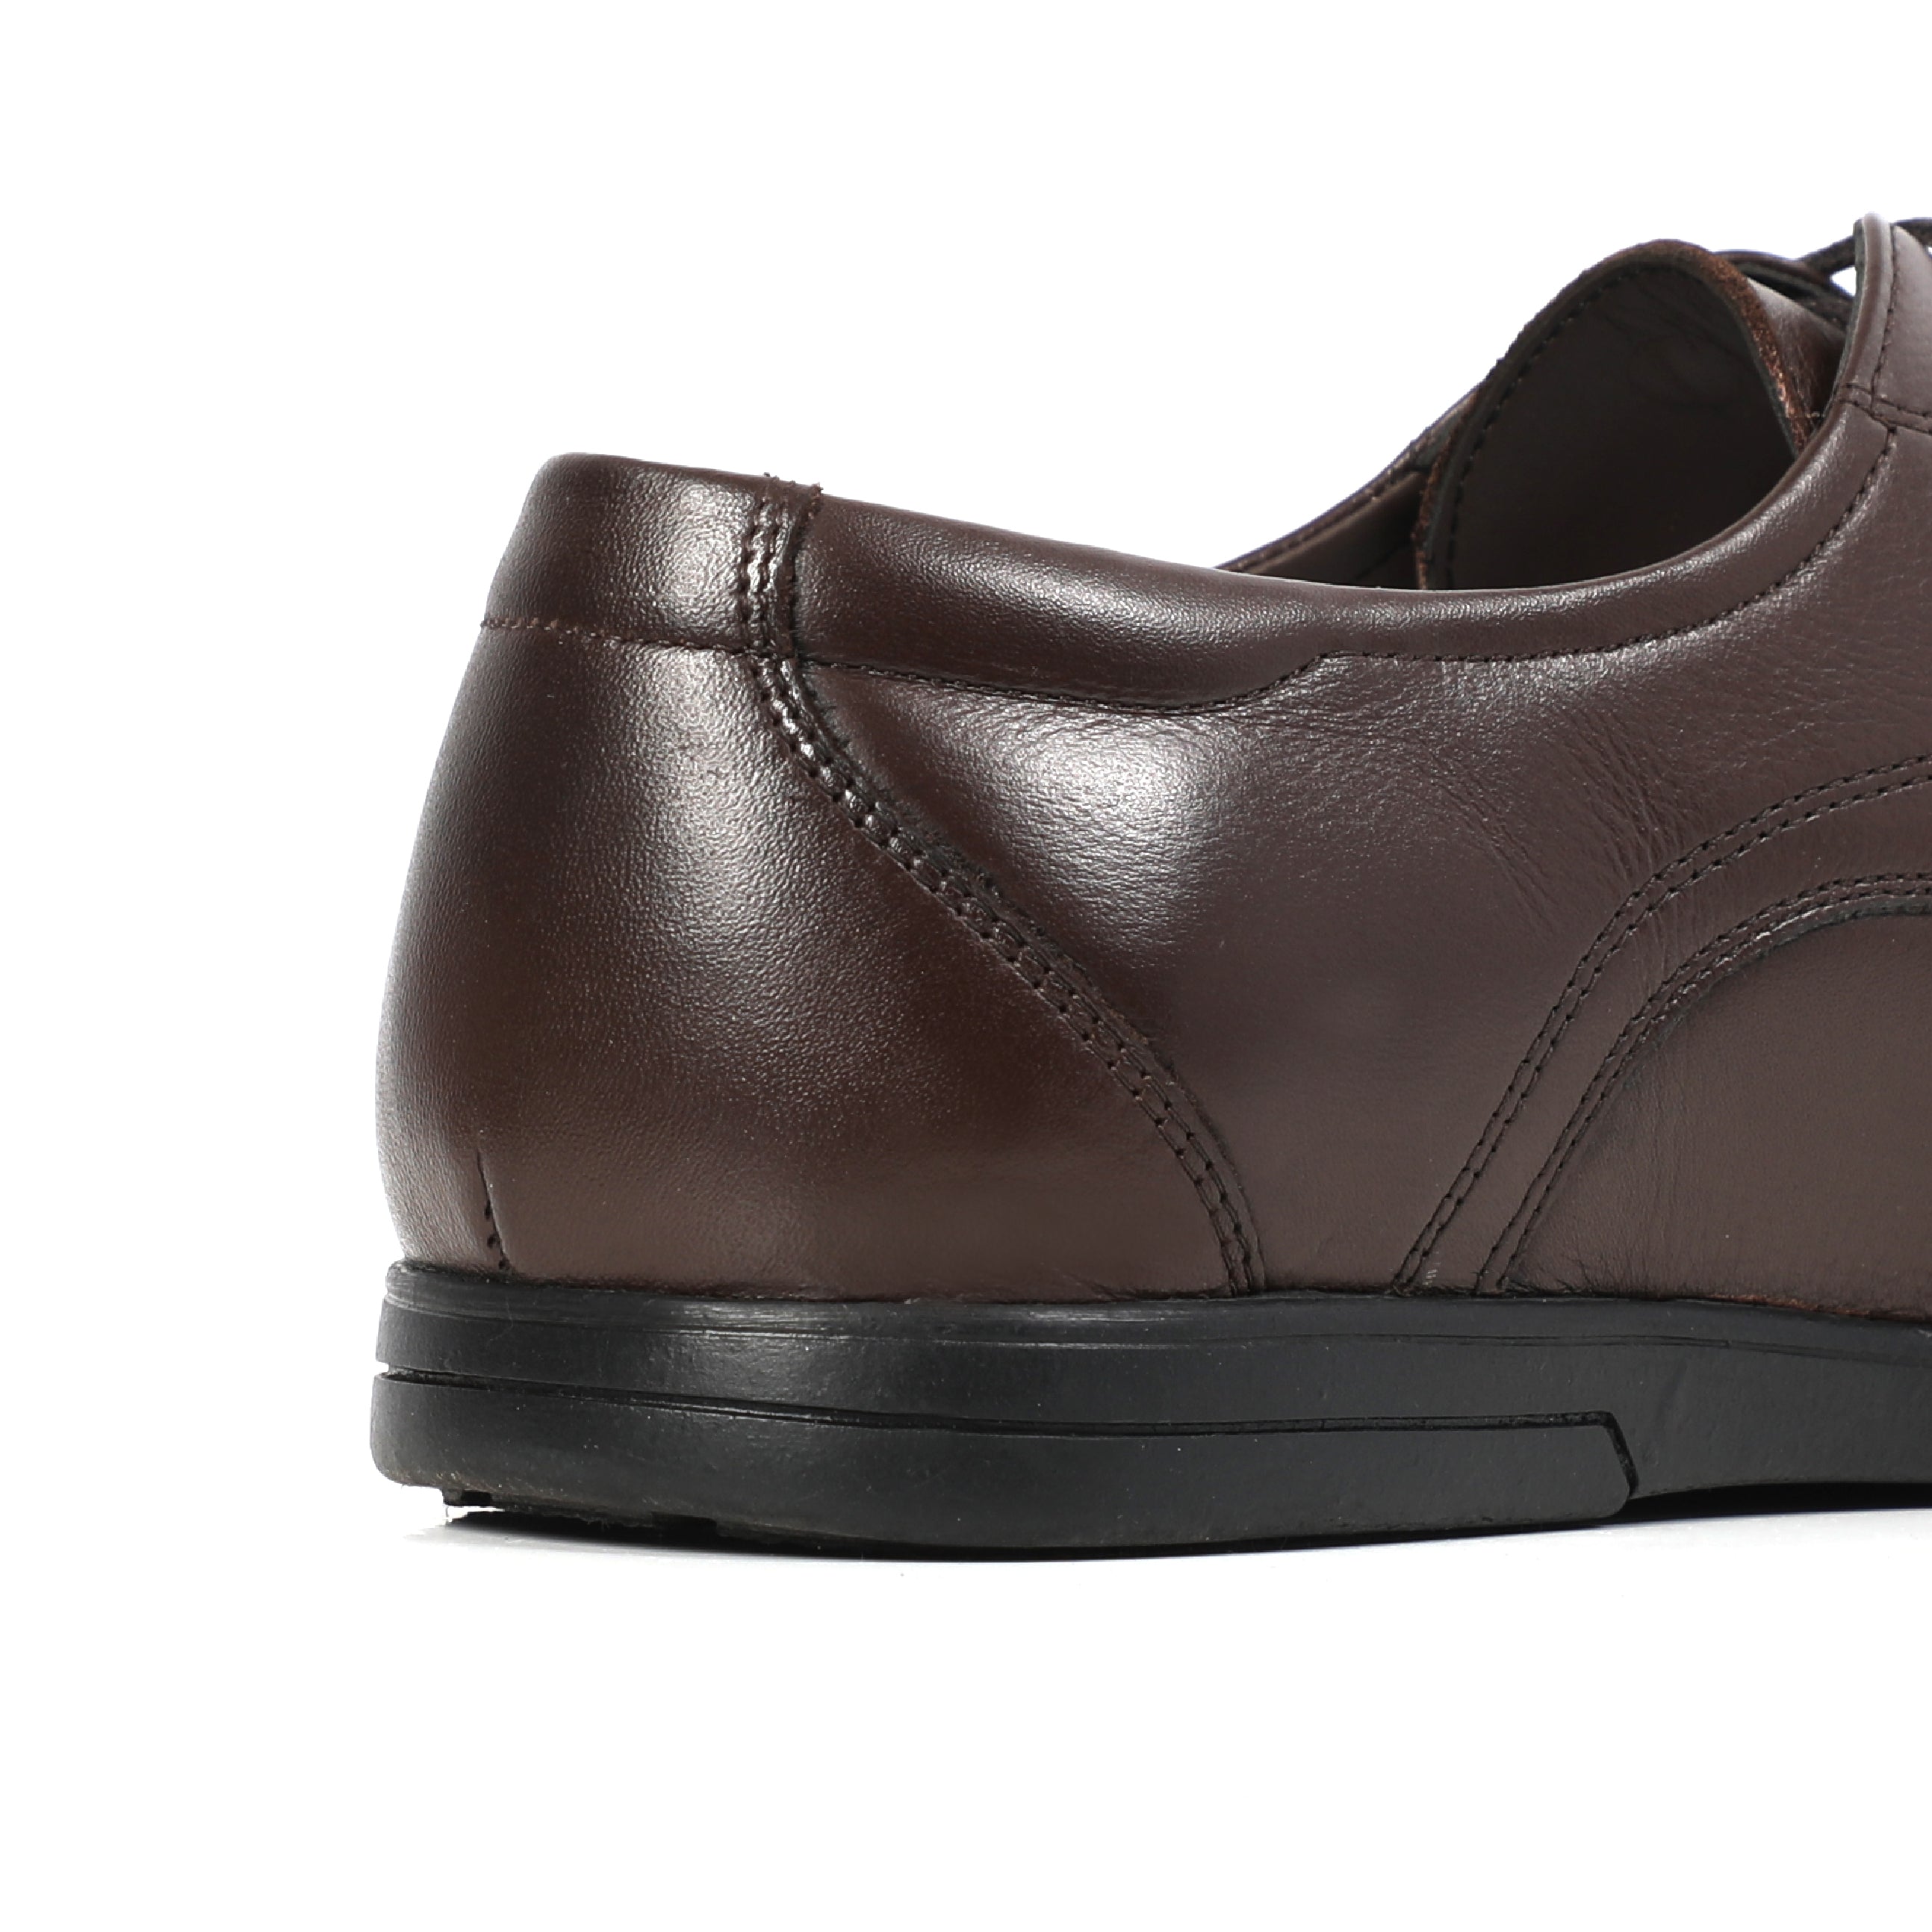 Men Classic Brown Shoes With Crafted Design